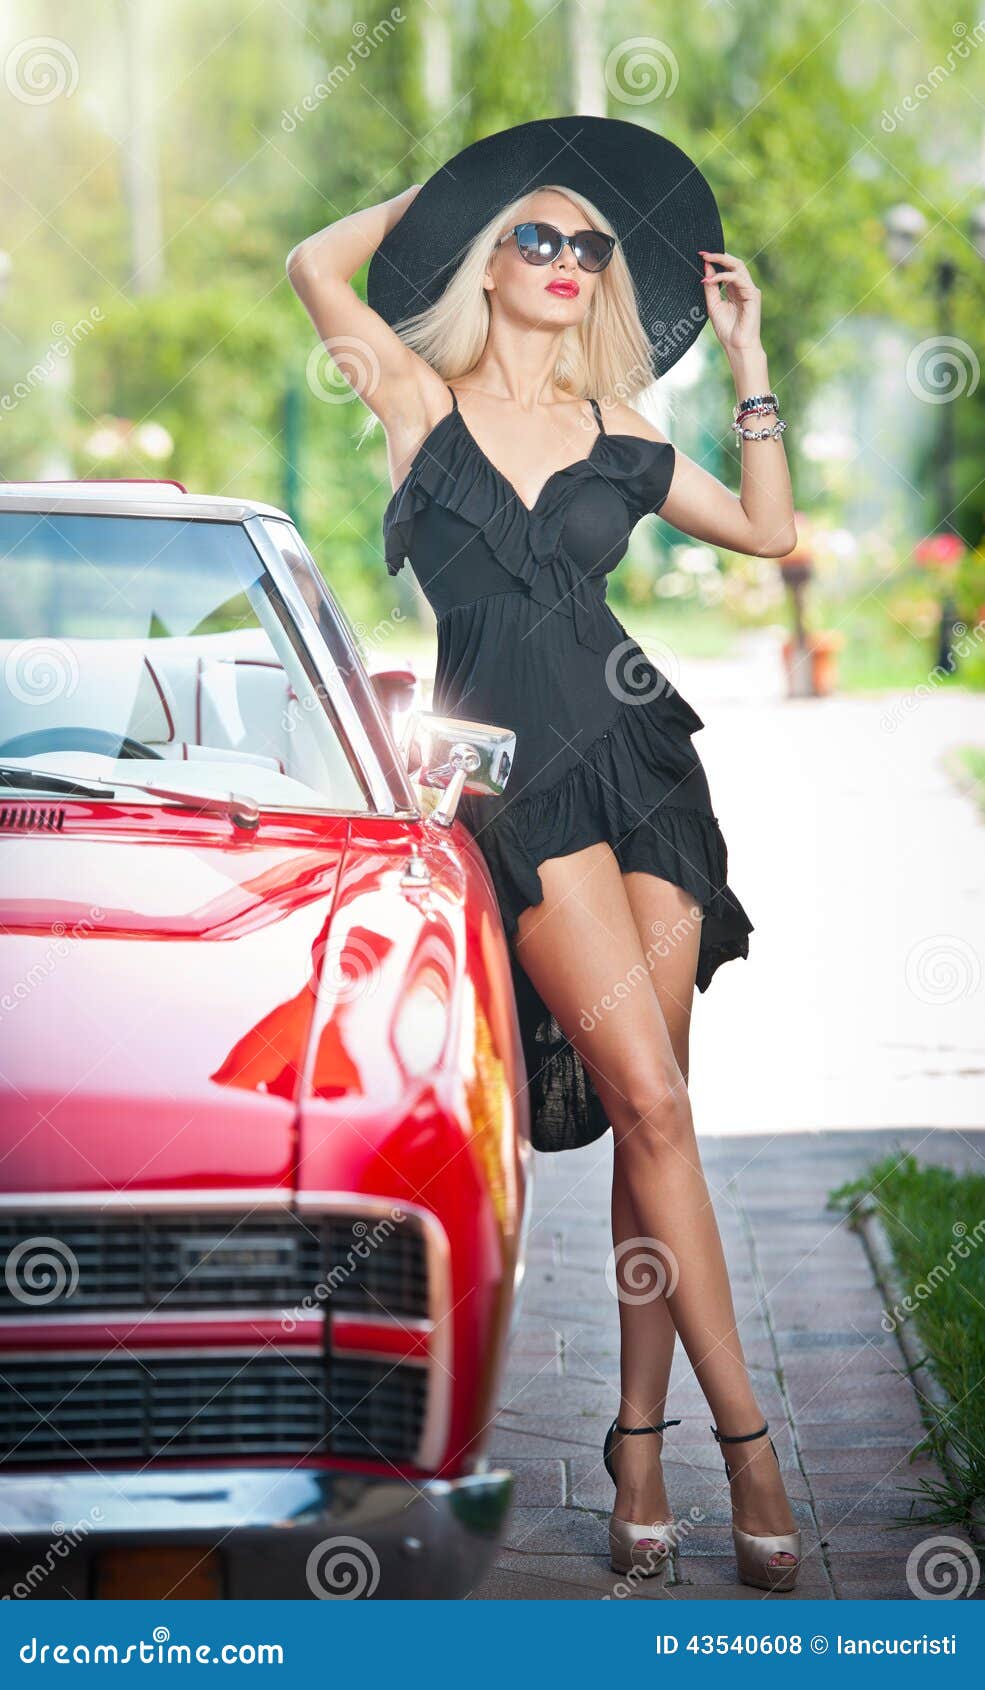 summer portrait of stylish blonde vintage woman with long legs posing near red retro car. fashionable attractive fair hair female